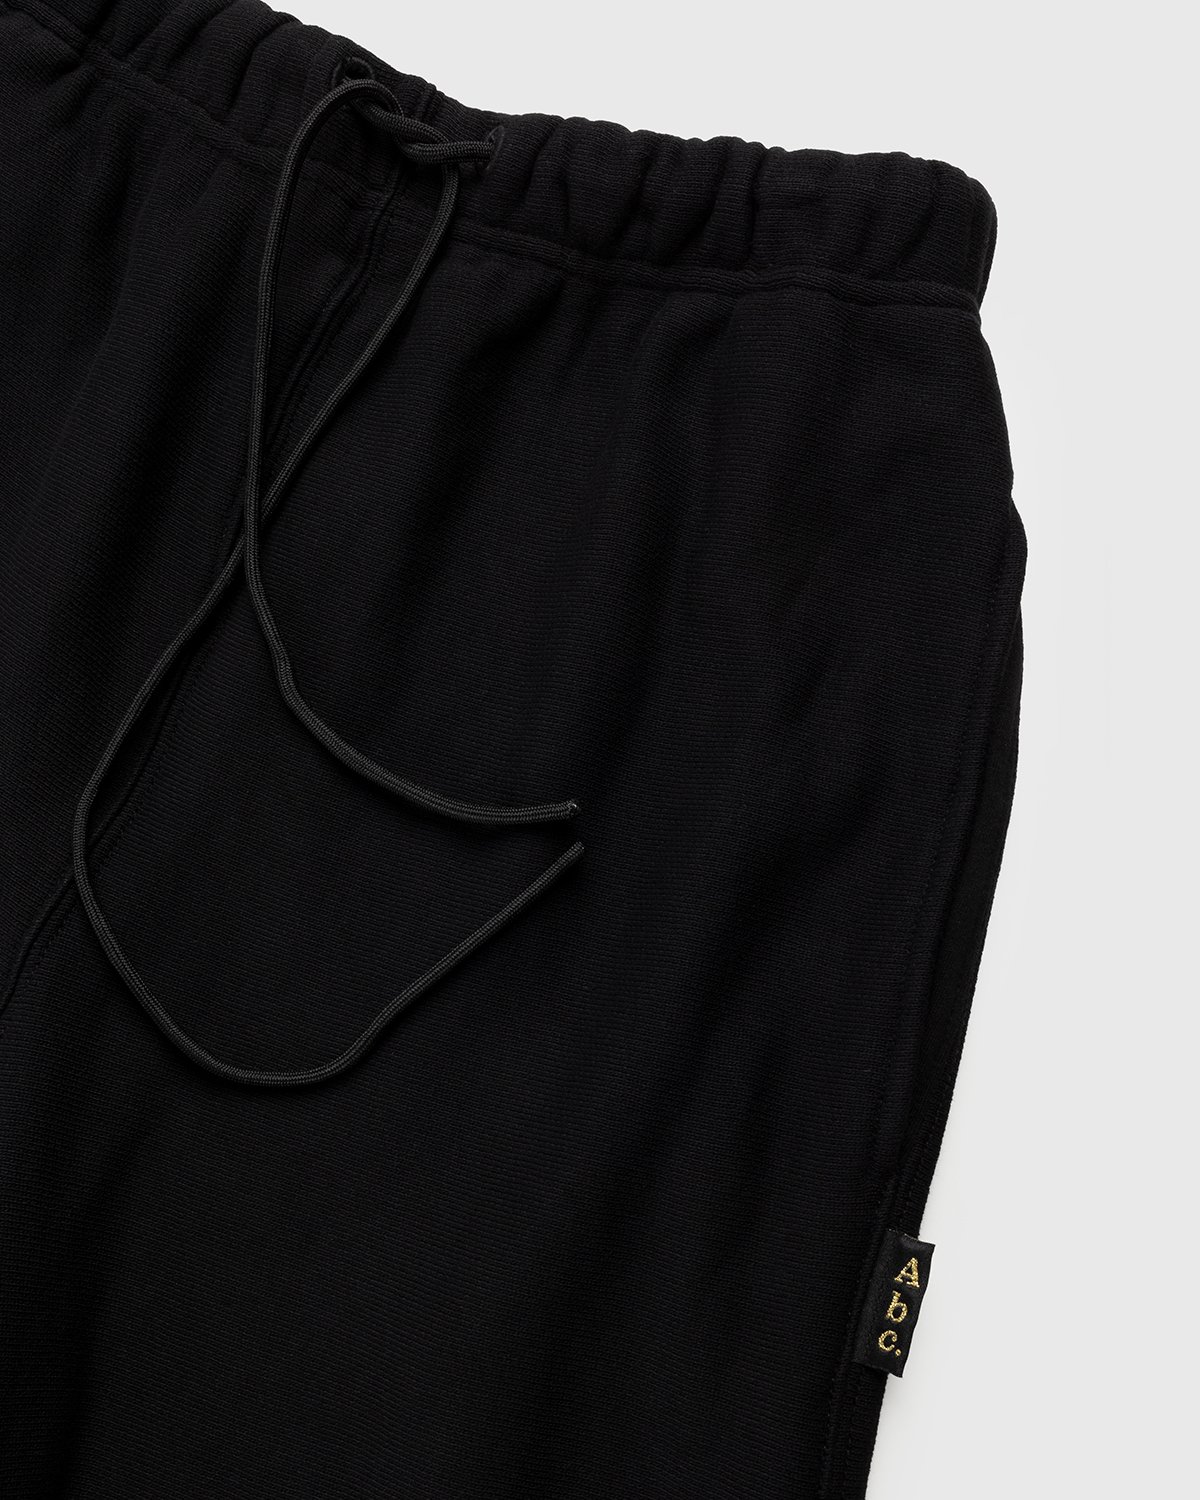 Abc. - French Terry Sweatpants Anthracite - Clothing - Black - Image 6